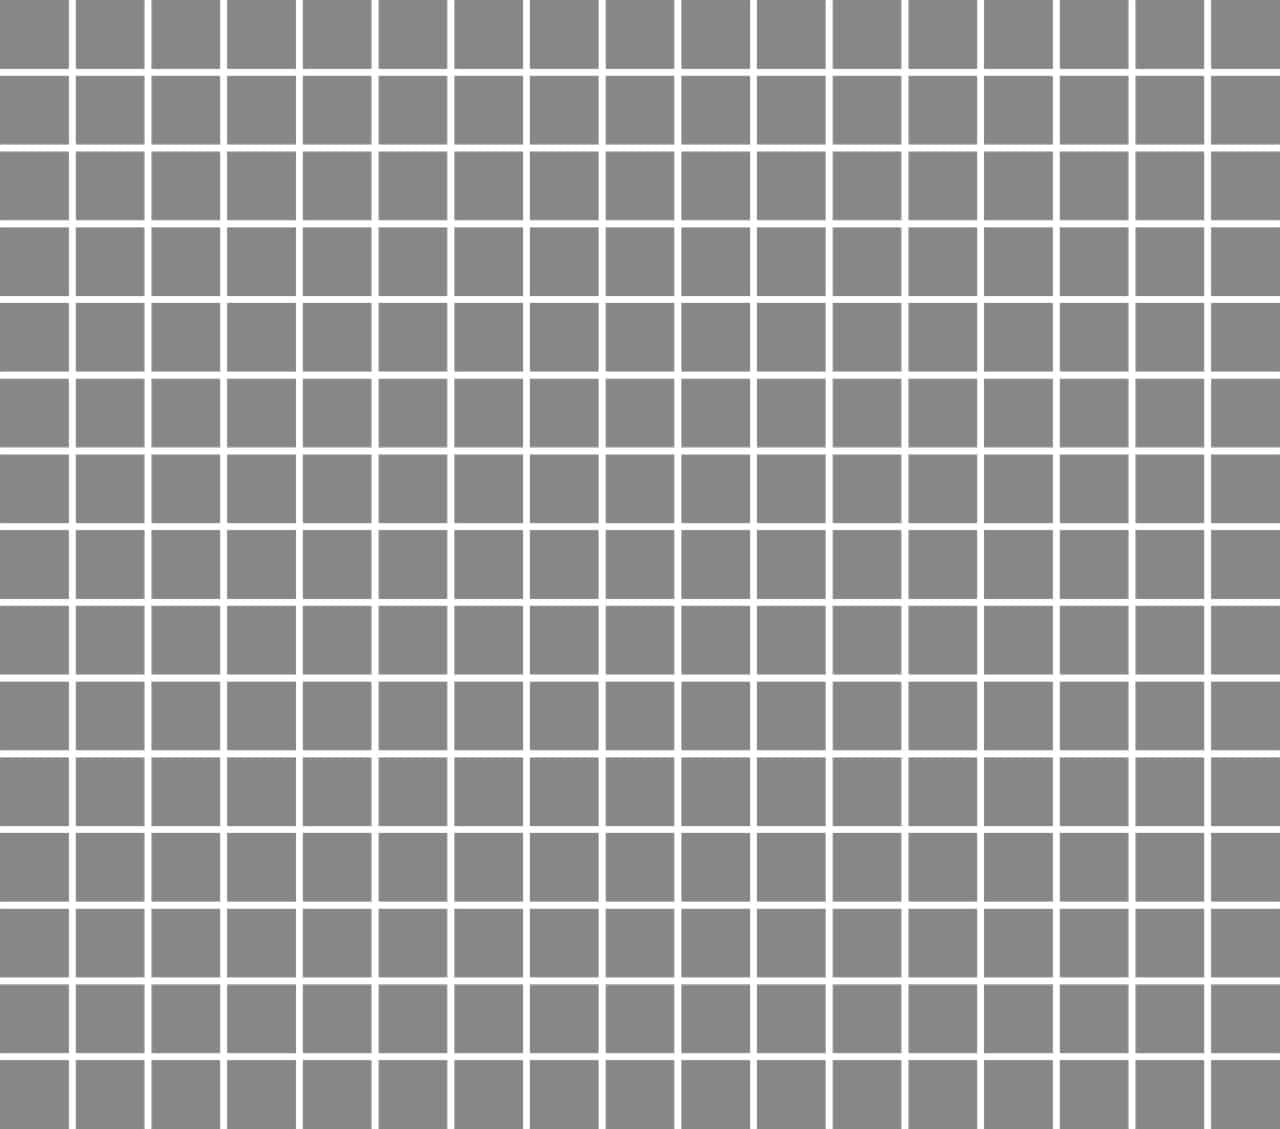 A Gray Square Grid With White Squares